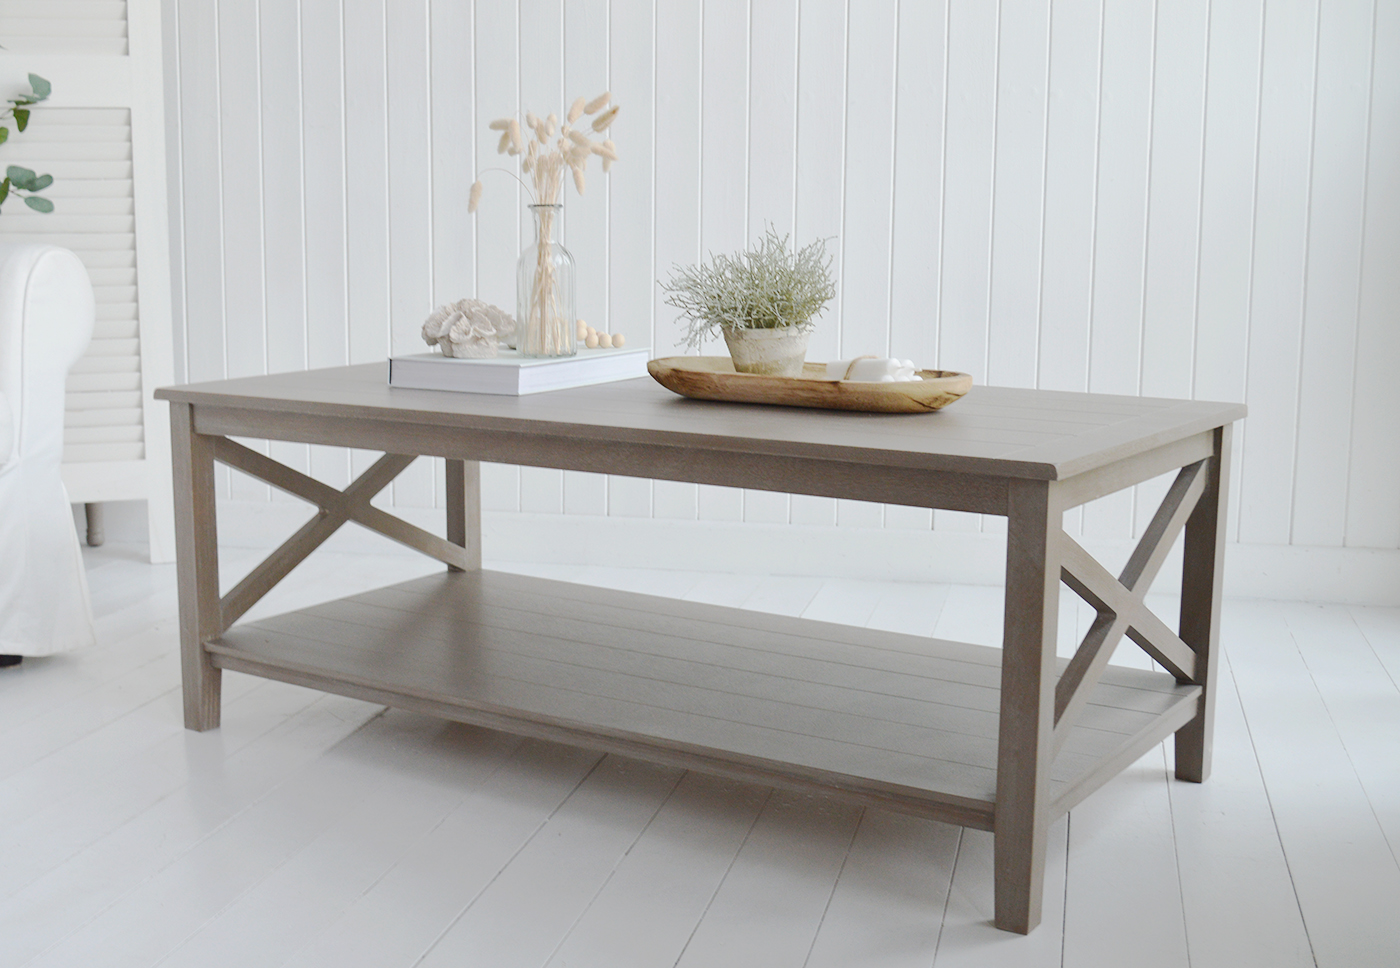 Cambridge Coffee Table - New England Interiors Furniture for Coastal, Modern Farmhouse and Country Homes